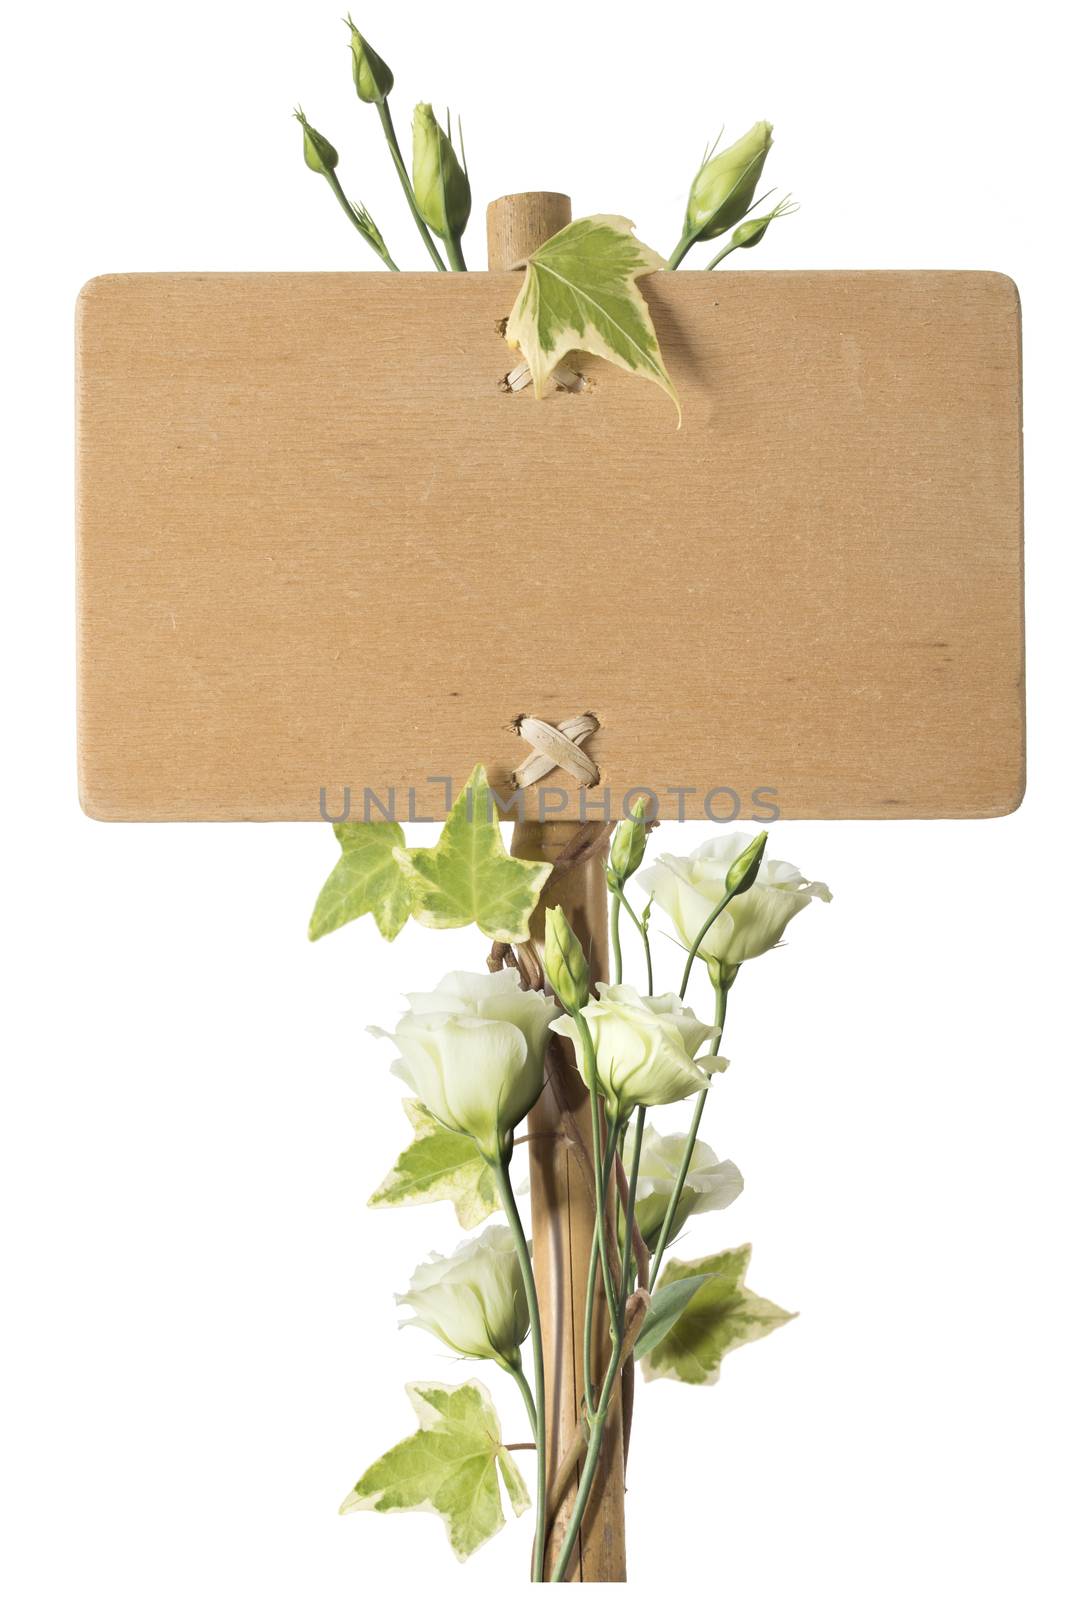 Wooden sign over white background with roses flowers sourrounding the post. Concept for advertising and communication purposes